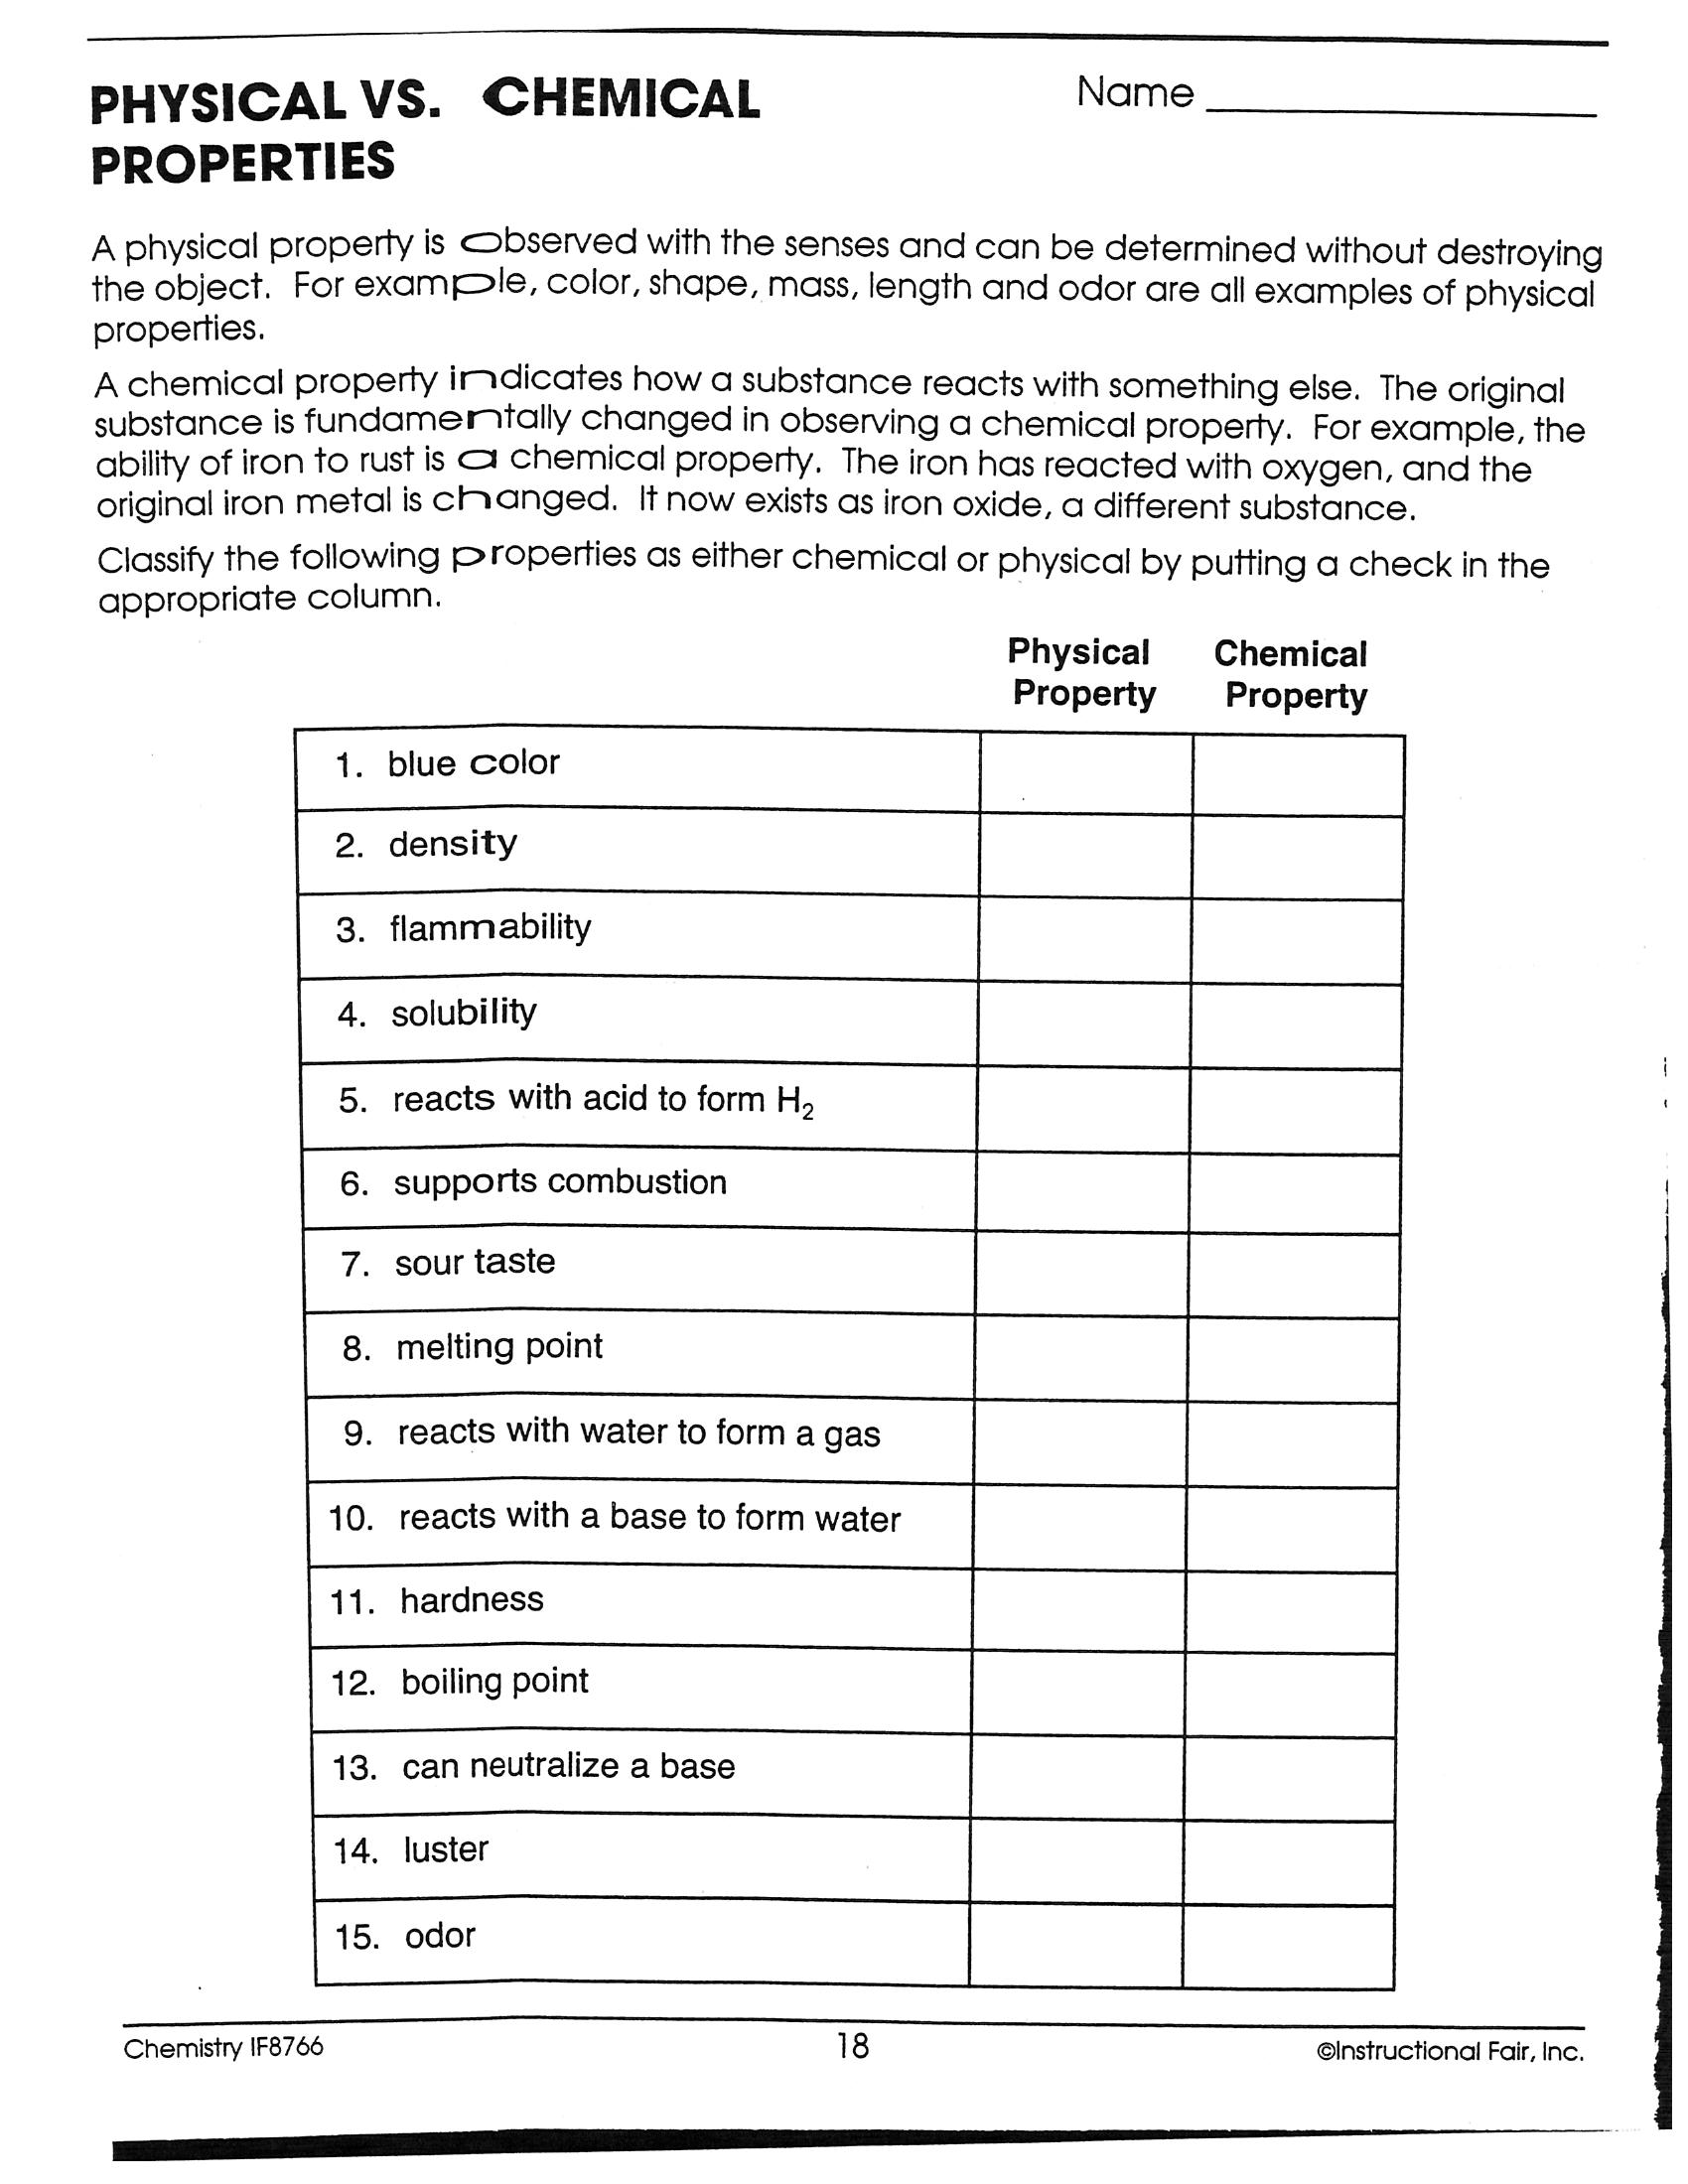 Physical Or Chemical Change? - Lessons - Blendspace With Regard To Physical Vs Chemical Properties Worksheet